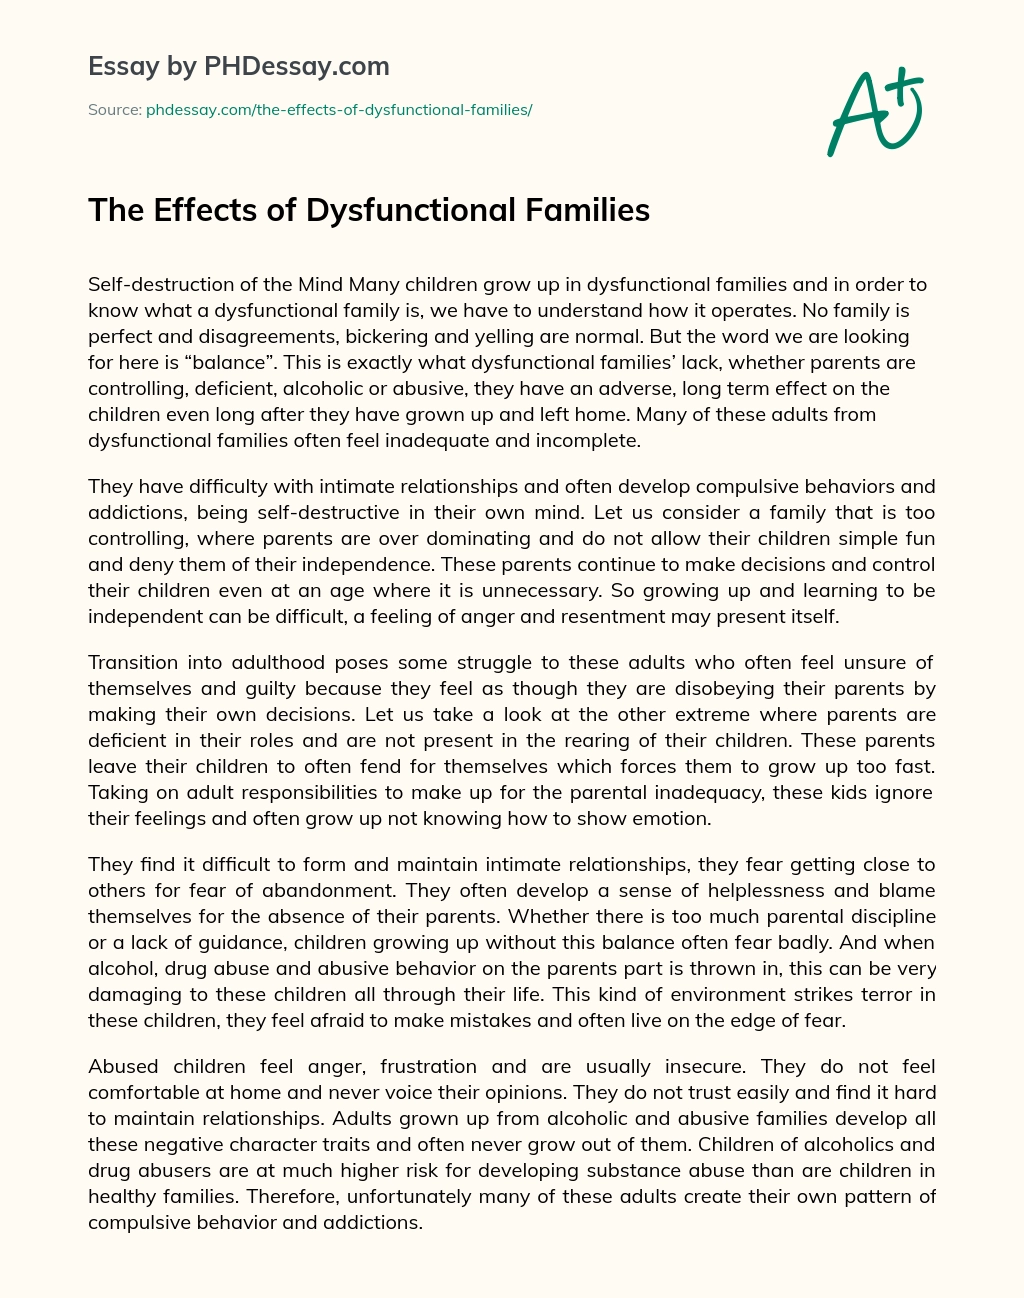 The Effects of Dysfunctional Families essay